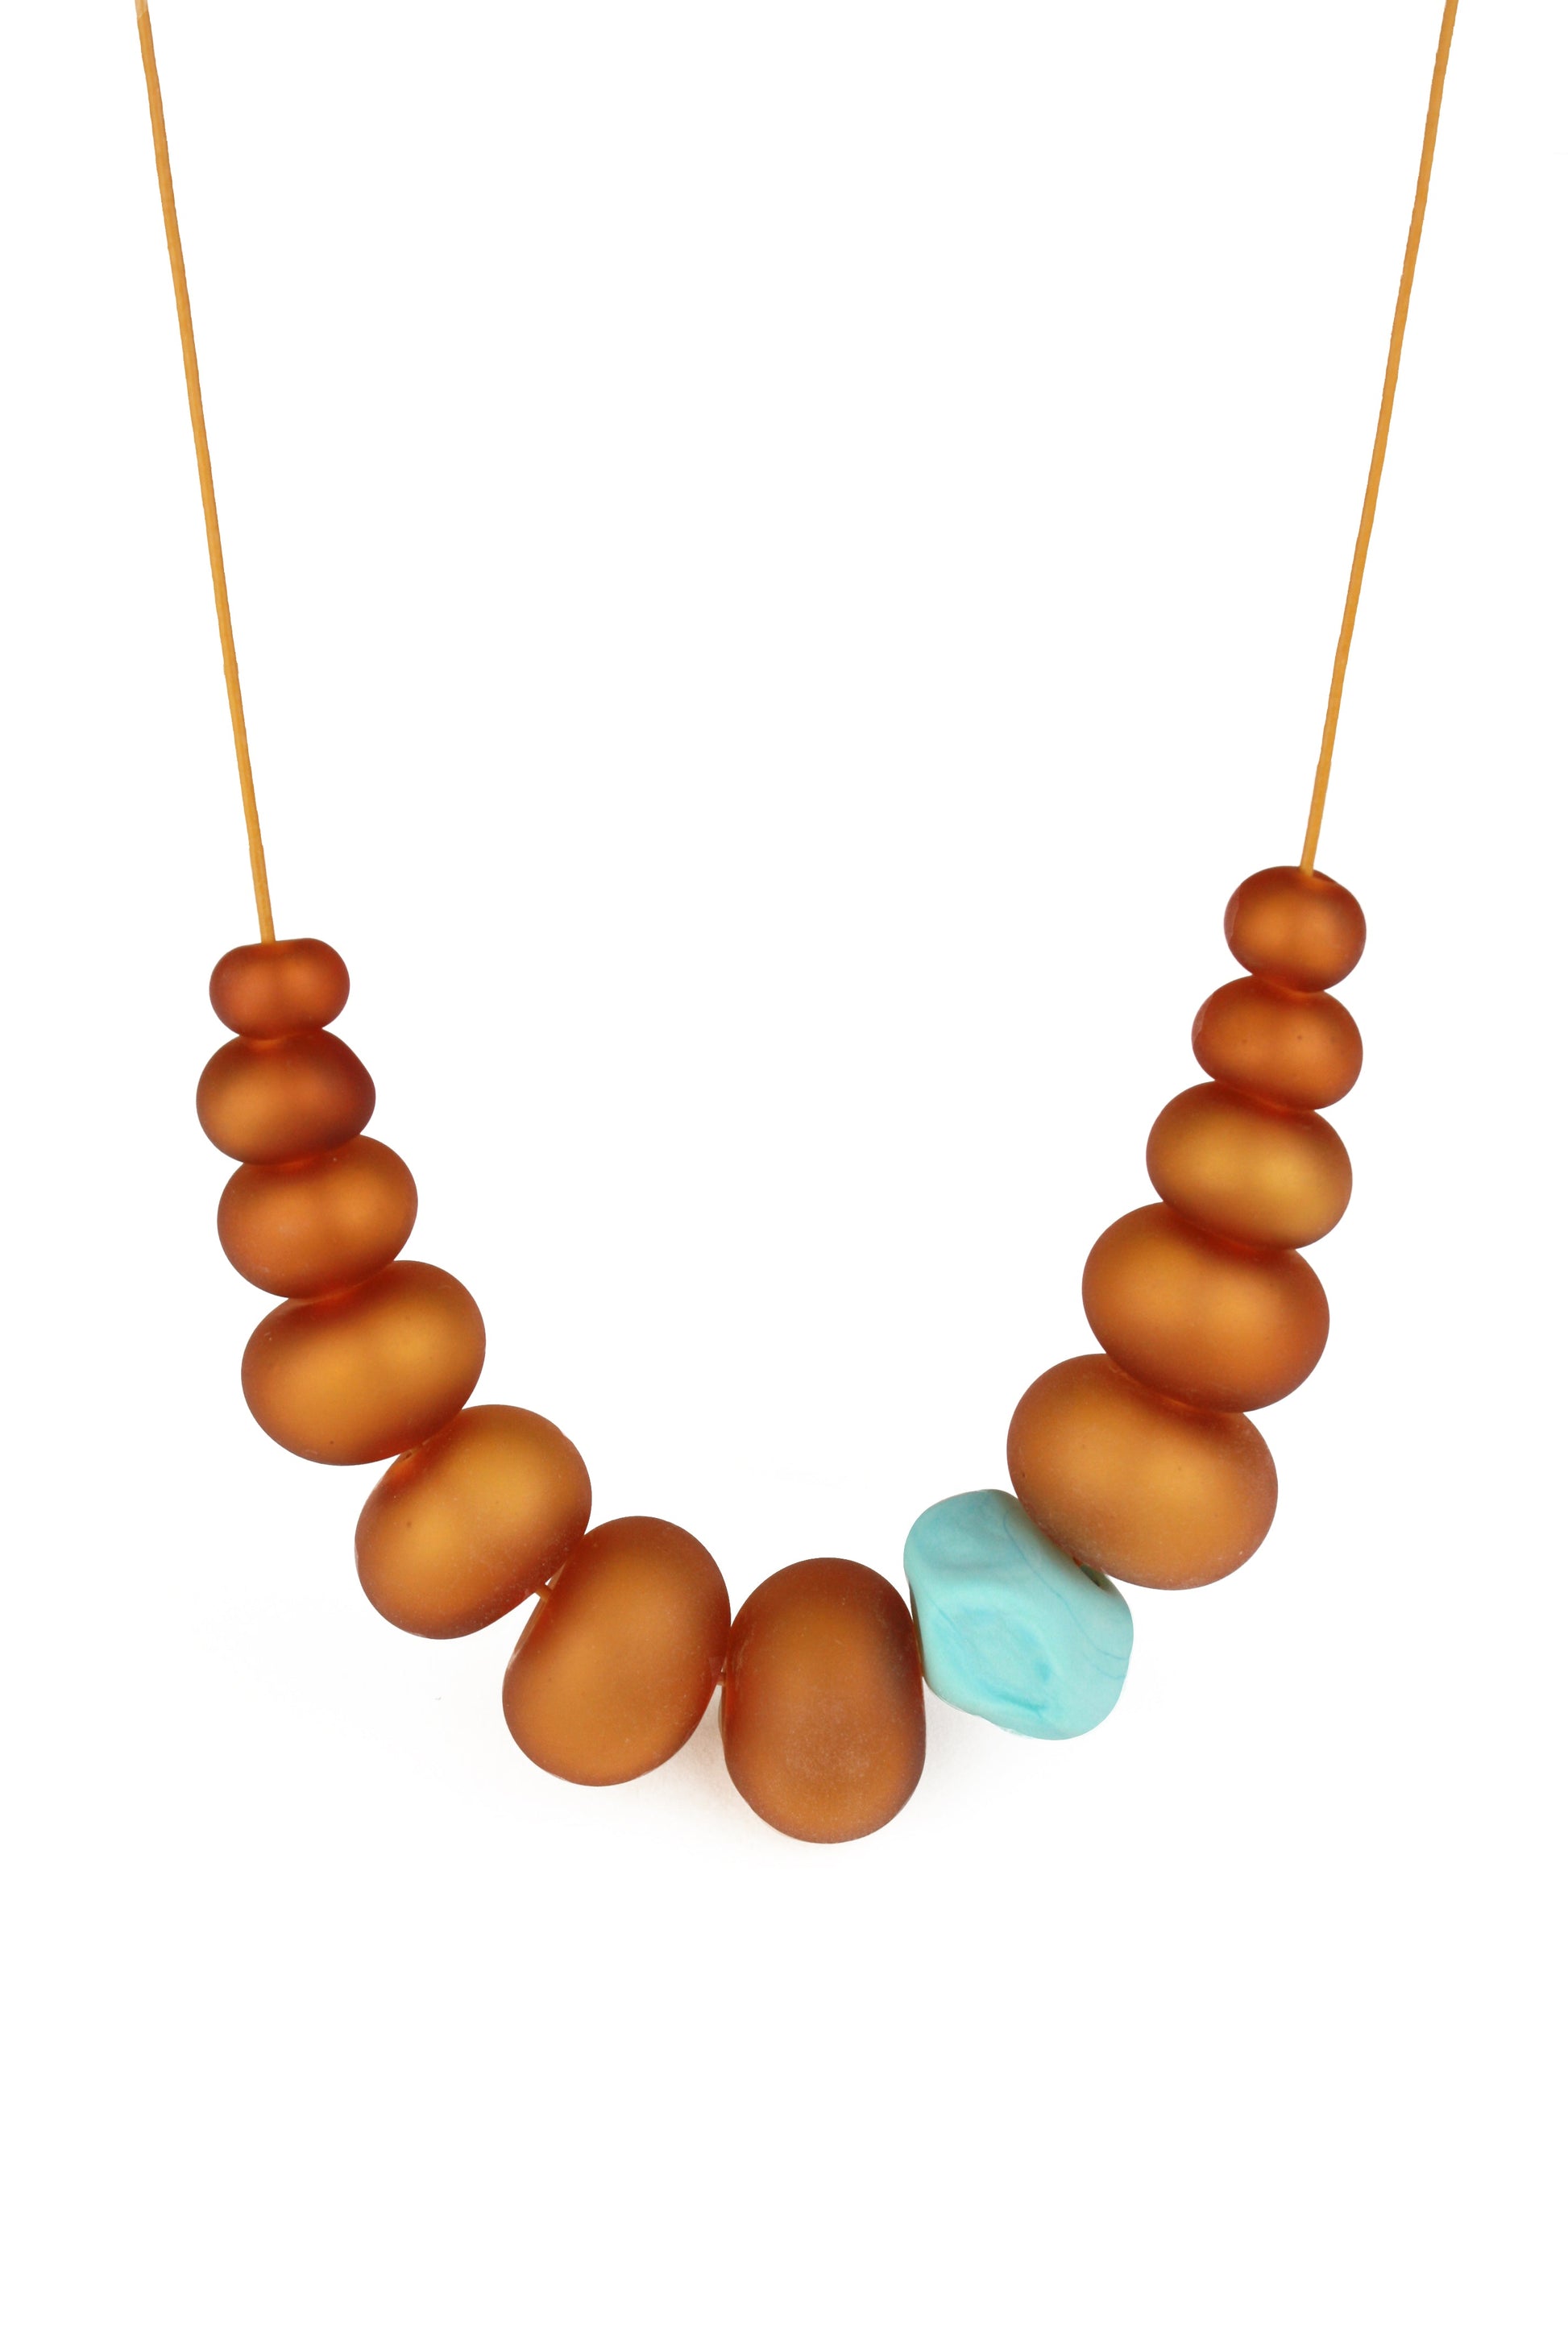 Necklace of hand blown and sandblasted hollow beads in velvety shades of amber glass paired with a turquoise glass nugget bead and strung on adjustable leather